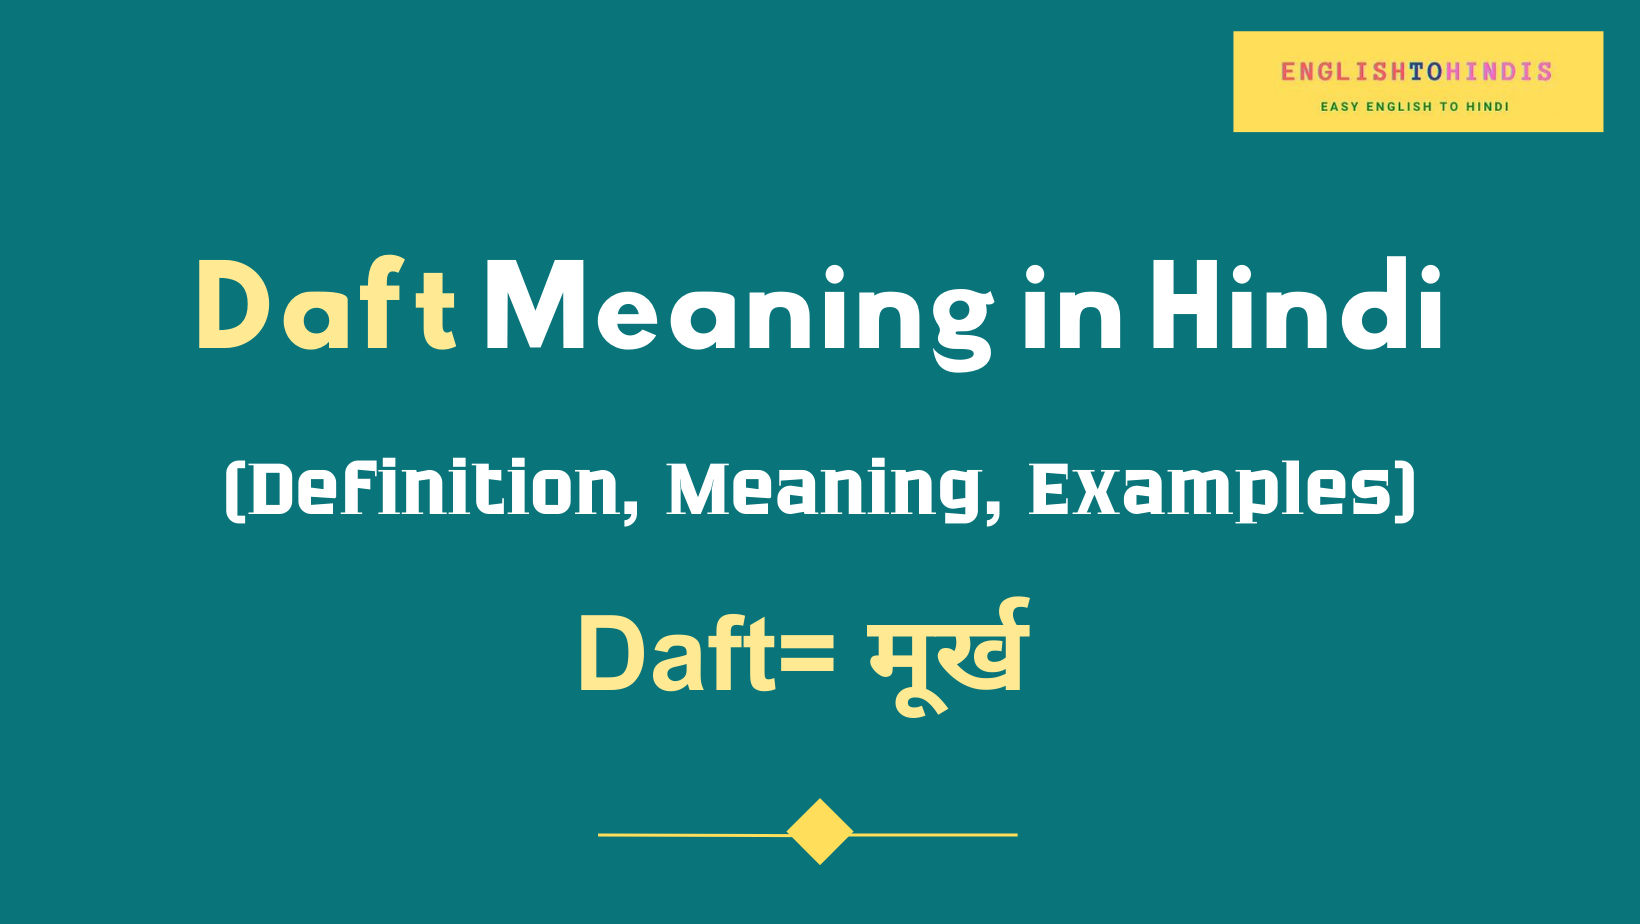 Daft Meaning in Hindi